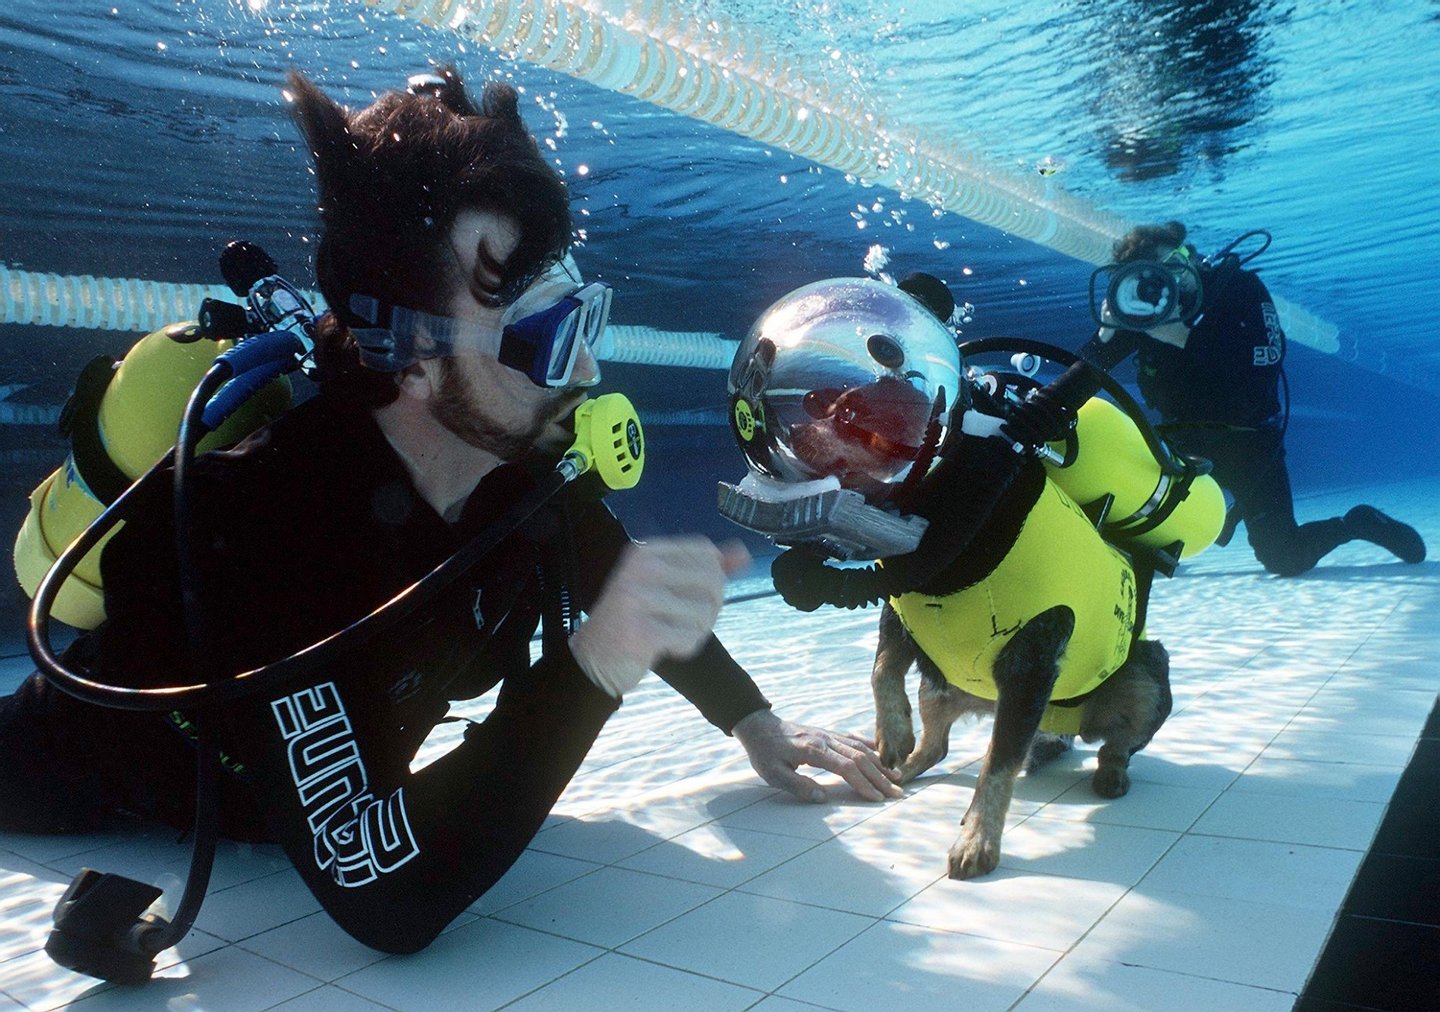 SYDNEY, AUSTRALIA - SEPTEMBER 10: This file photo from January shows "Hooch" (C) enjoying a scuba diving lesson with her owner Sean Herbert (L) in a pool near Sydney. "Hooch," a cross between a cattle dog and a King Charles spaniel, has made 14 scuba dives and 53 parachute jumps but has been forced to retire 10 September after she broke her leg falling out of bed. (Photo credit should read JAY TOWN/AFP/Getty Images)